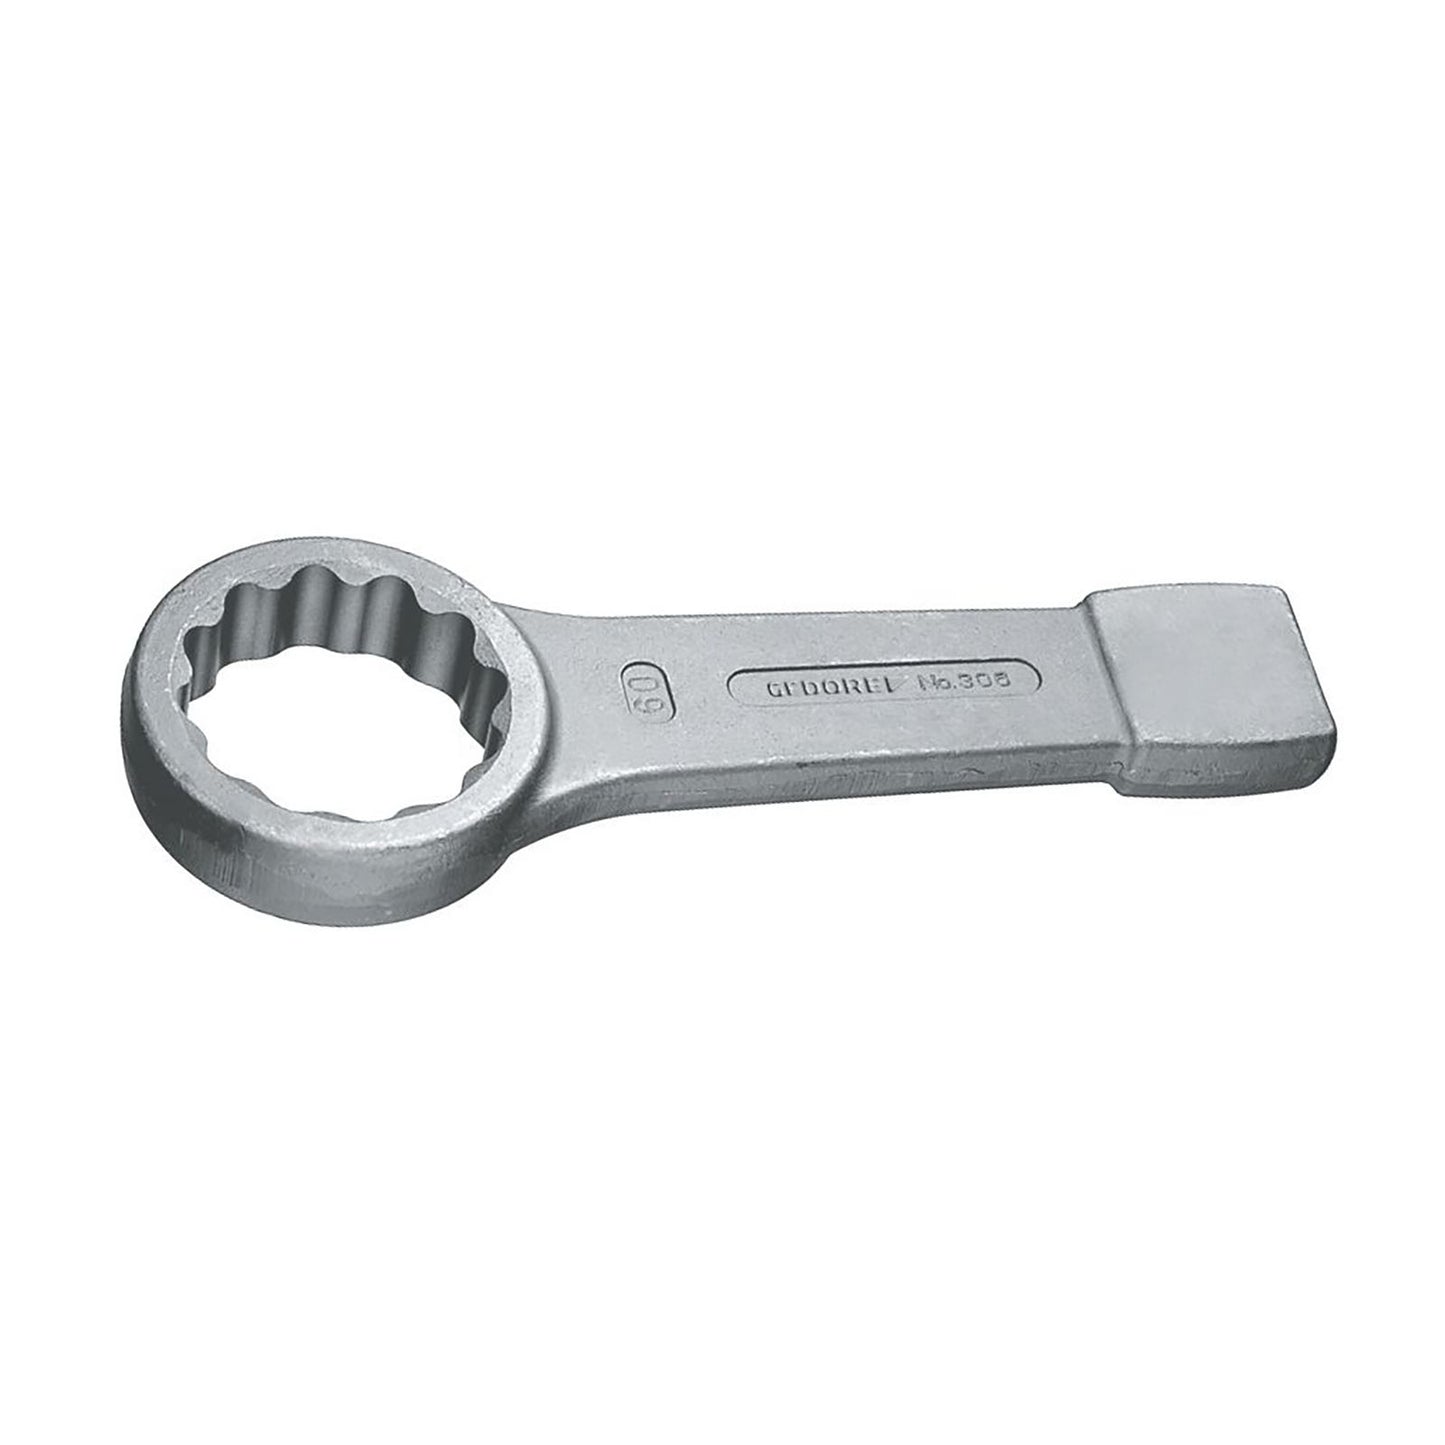 GEDORE 306 65 - Closed Strike Wrench, 65mm (6476160)